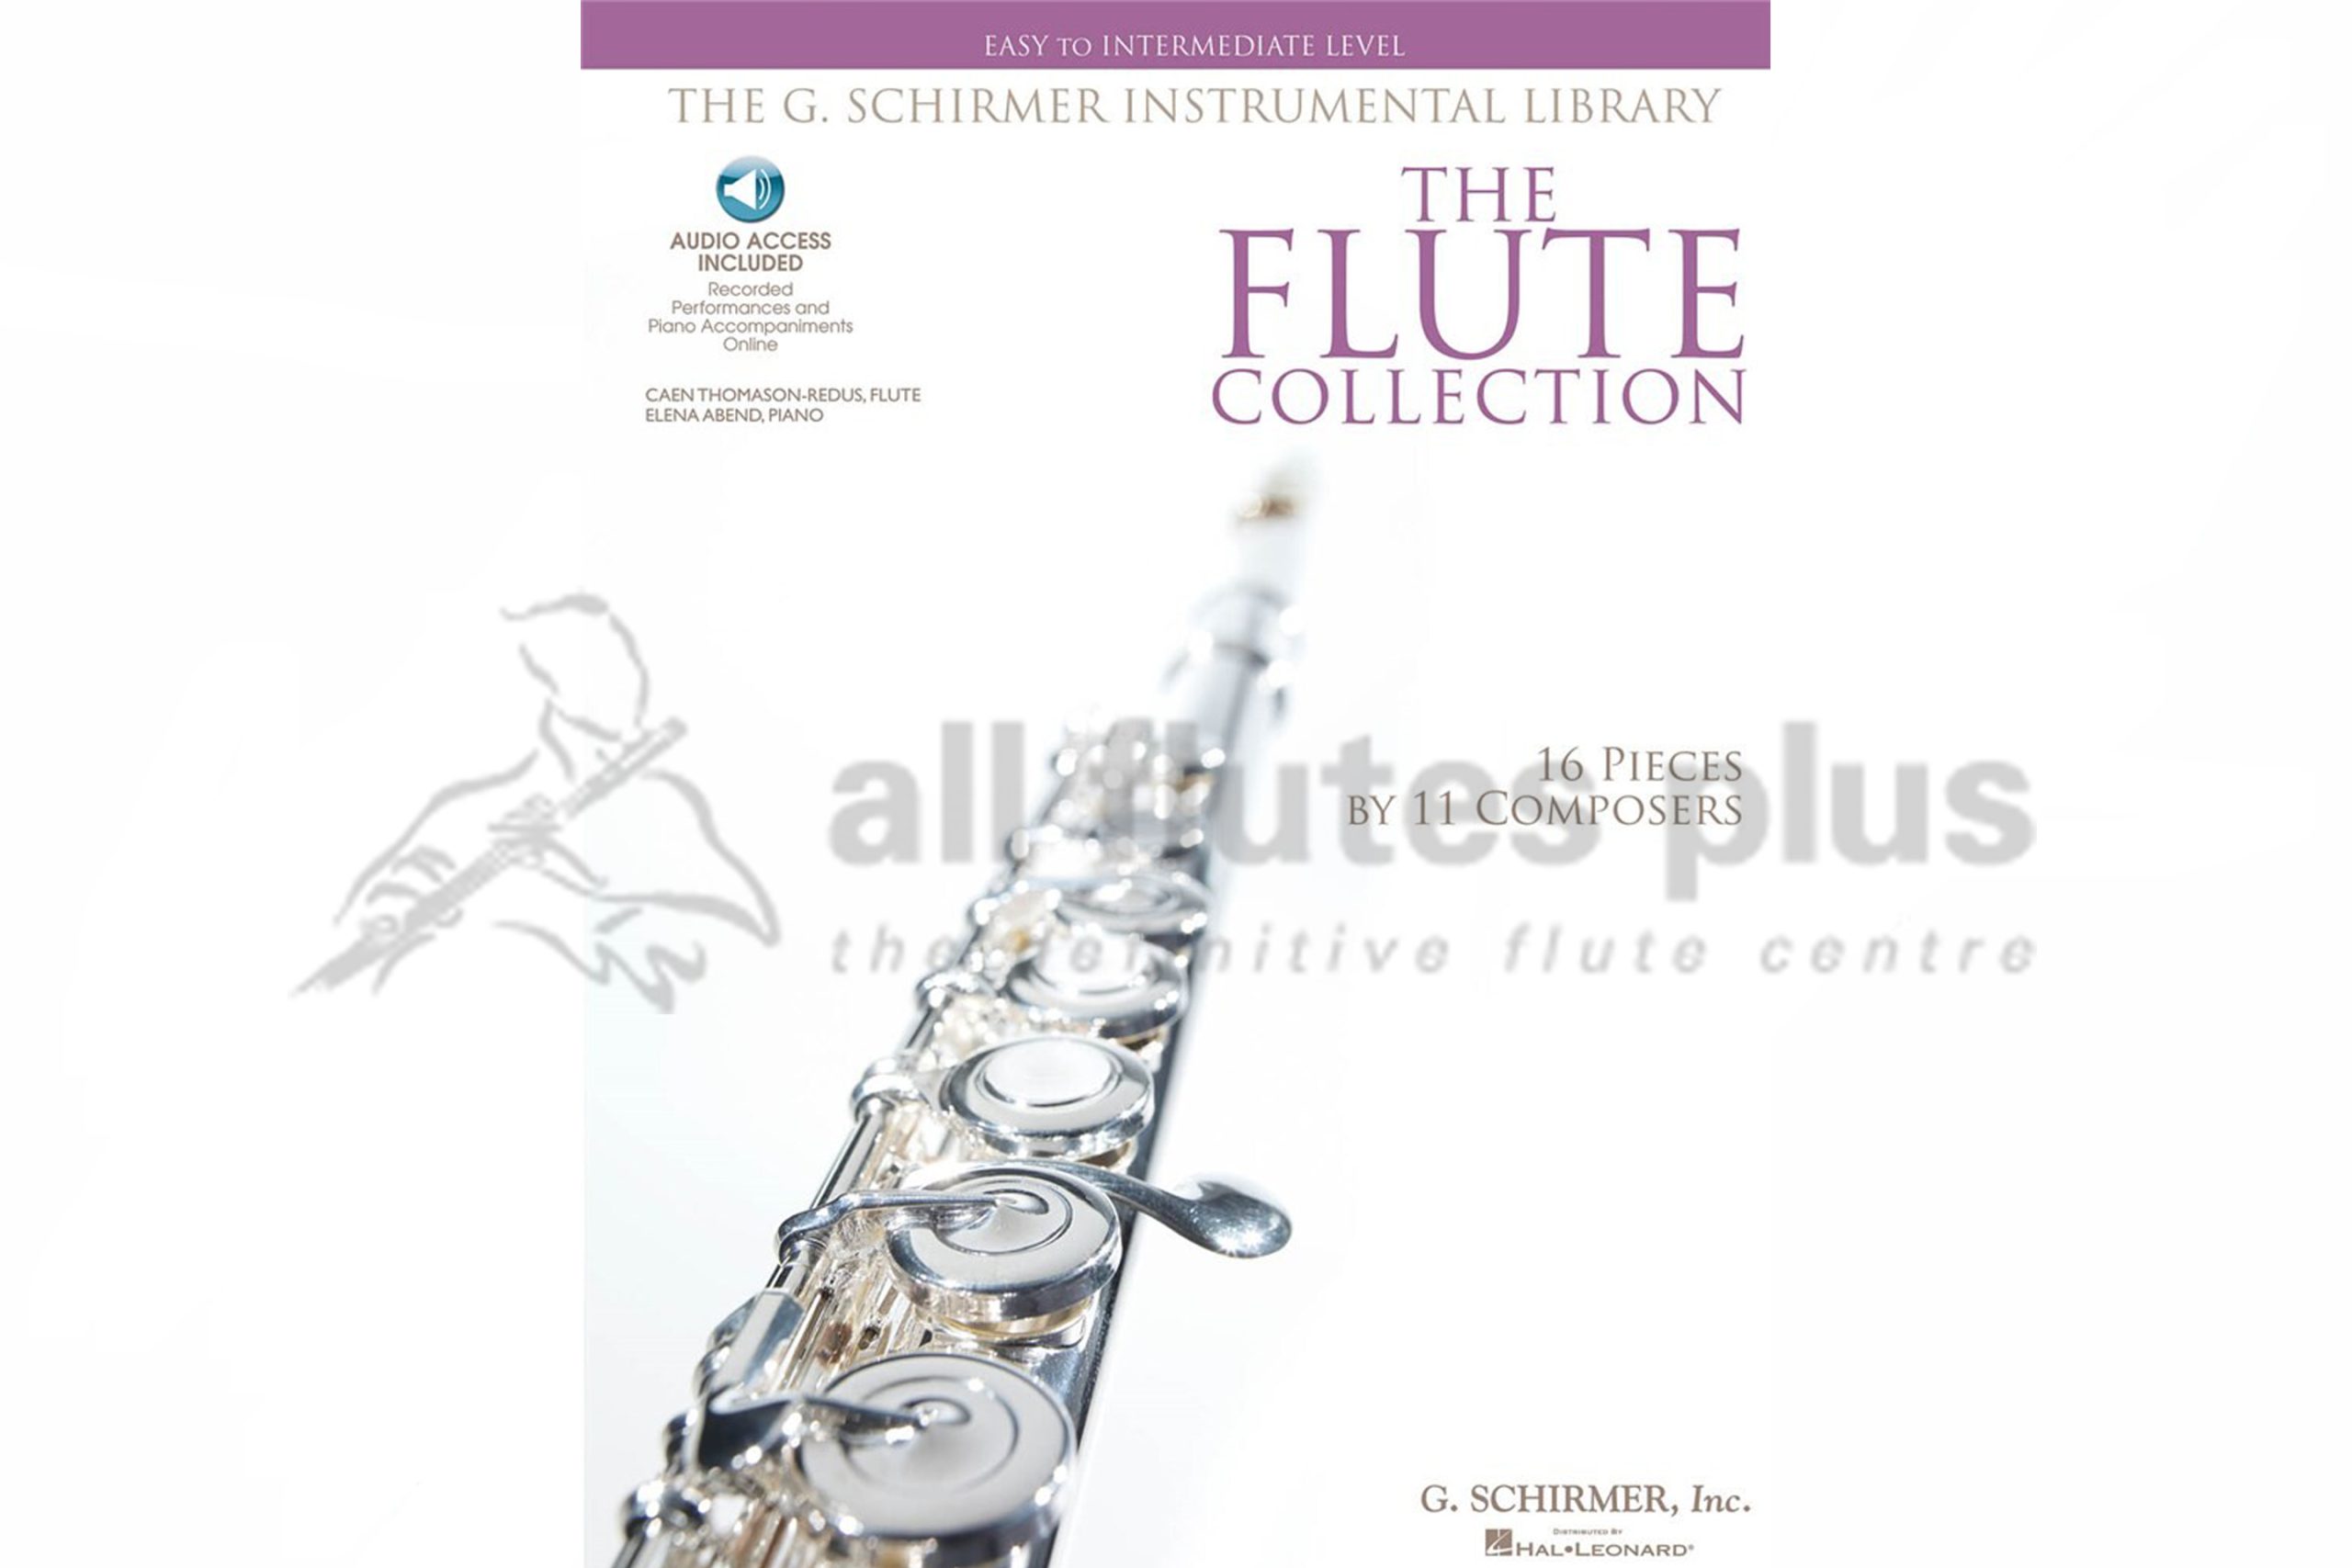 The Flute Collection-Easy to Intermediate